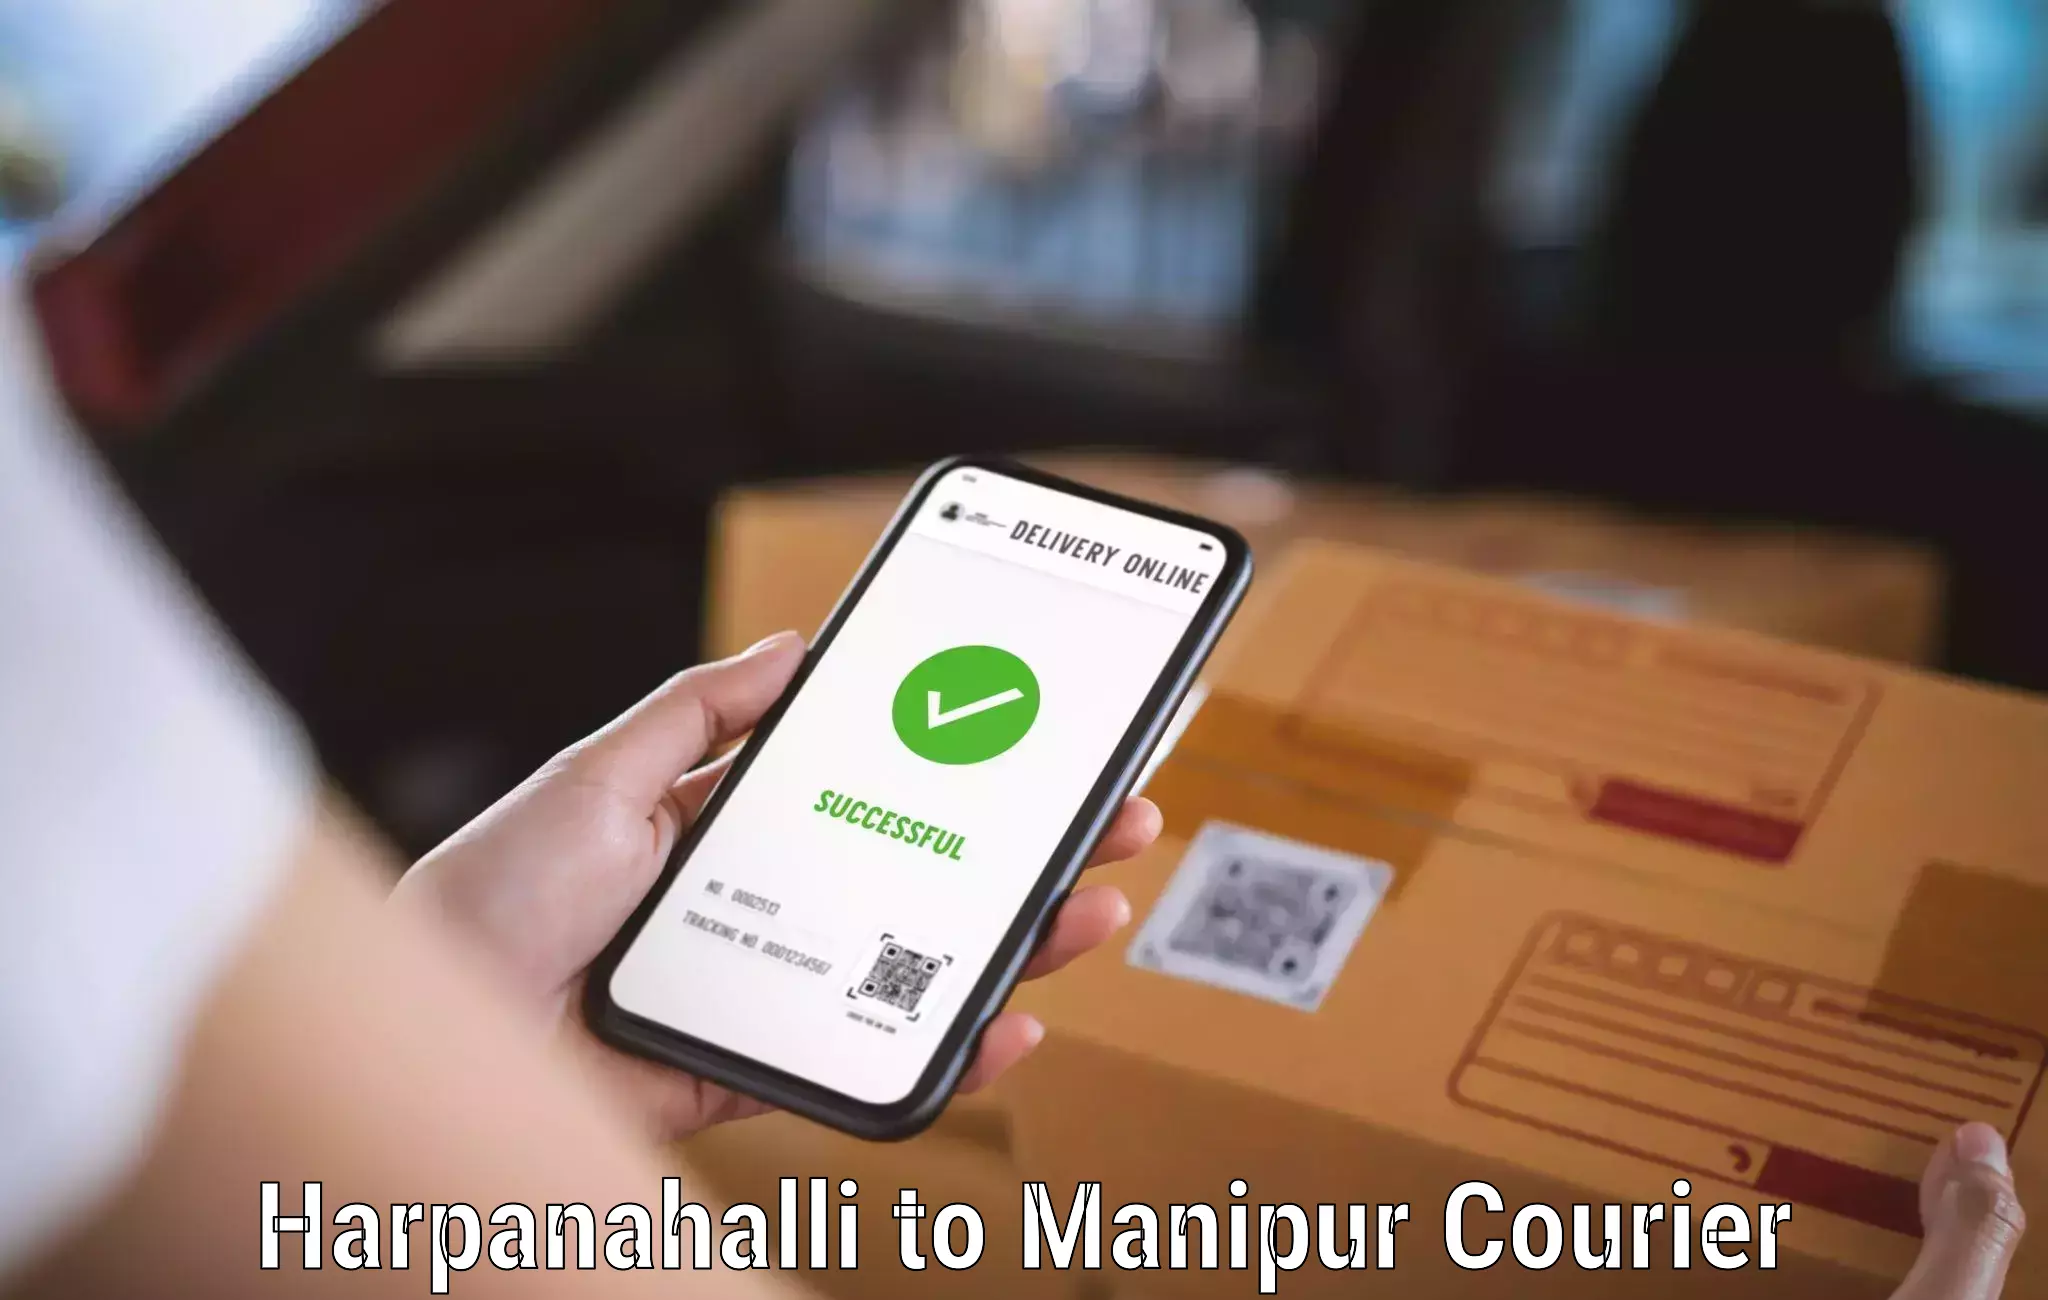 Local delivery service Harpanahalli to Chandel